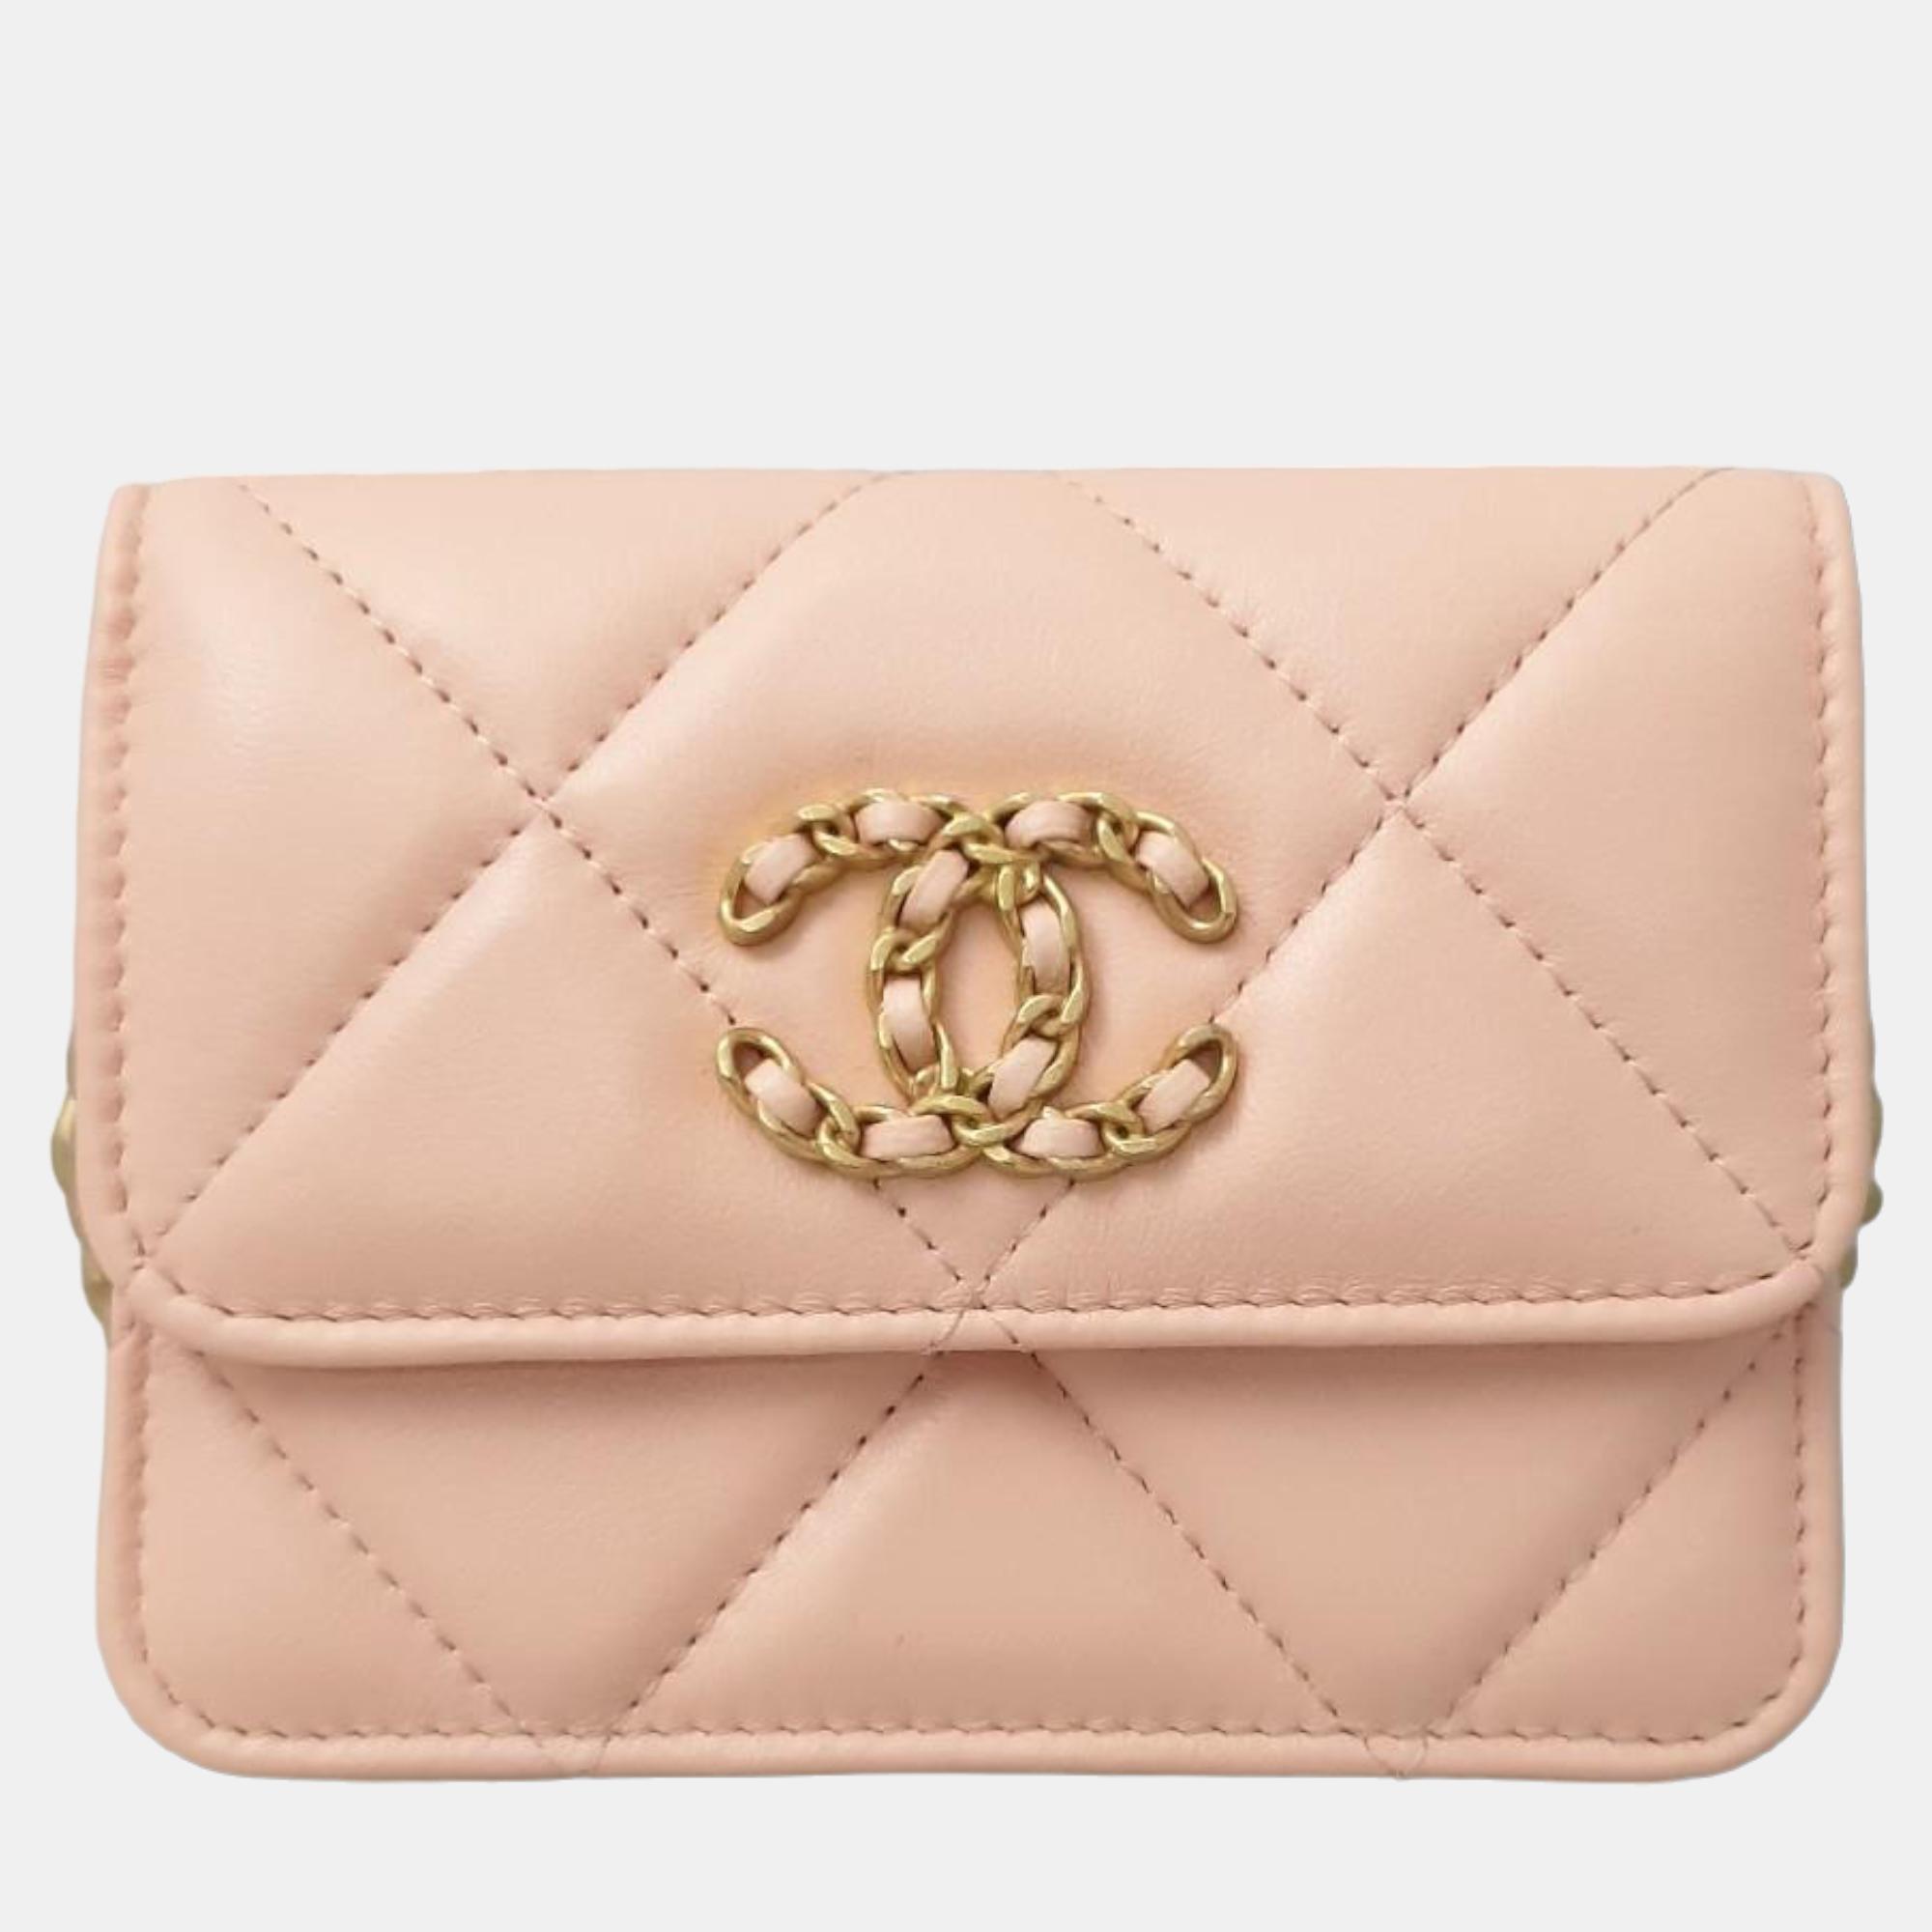 Chanel pink leather 19 chain coin purse